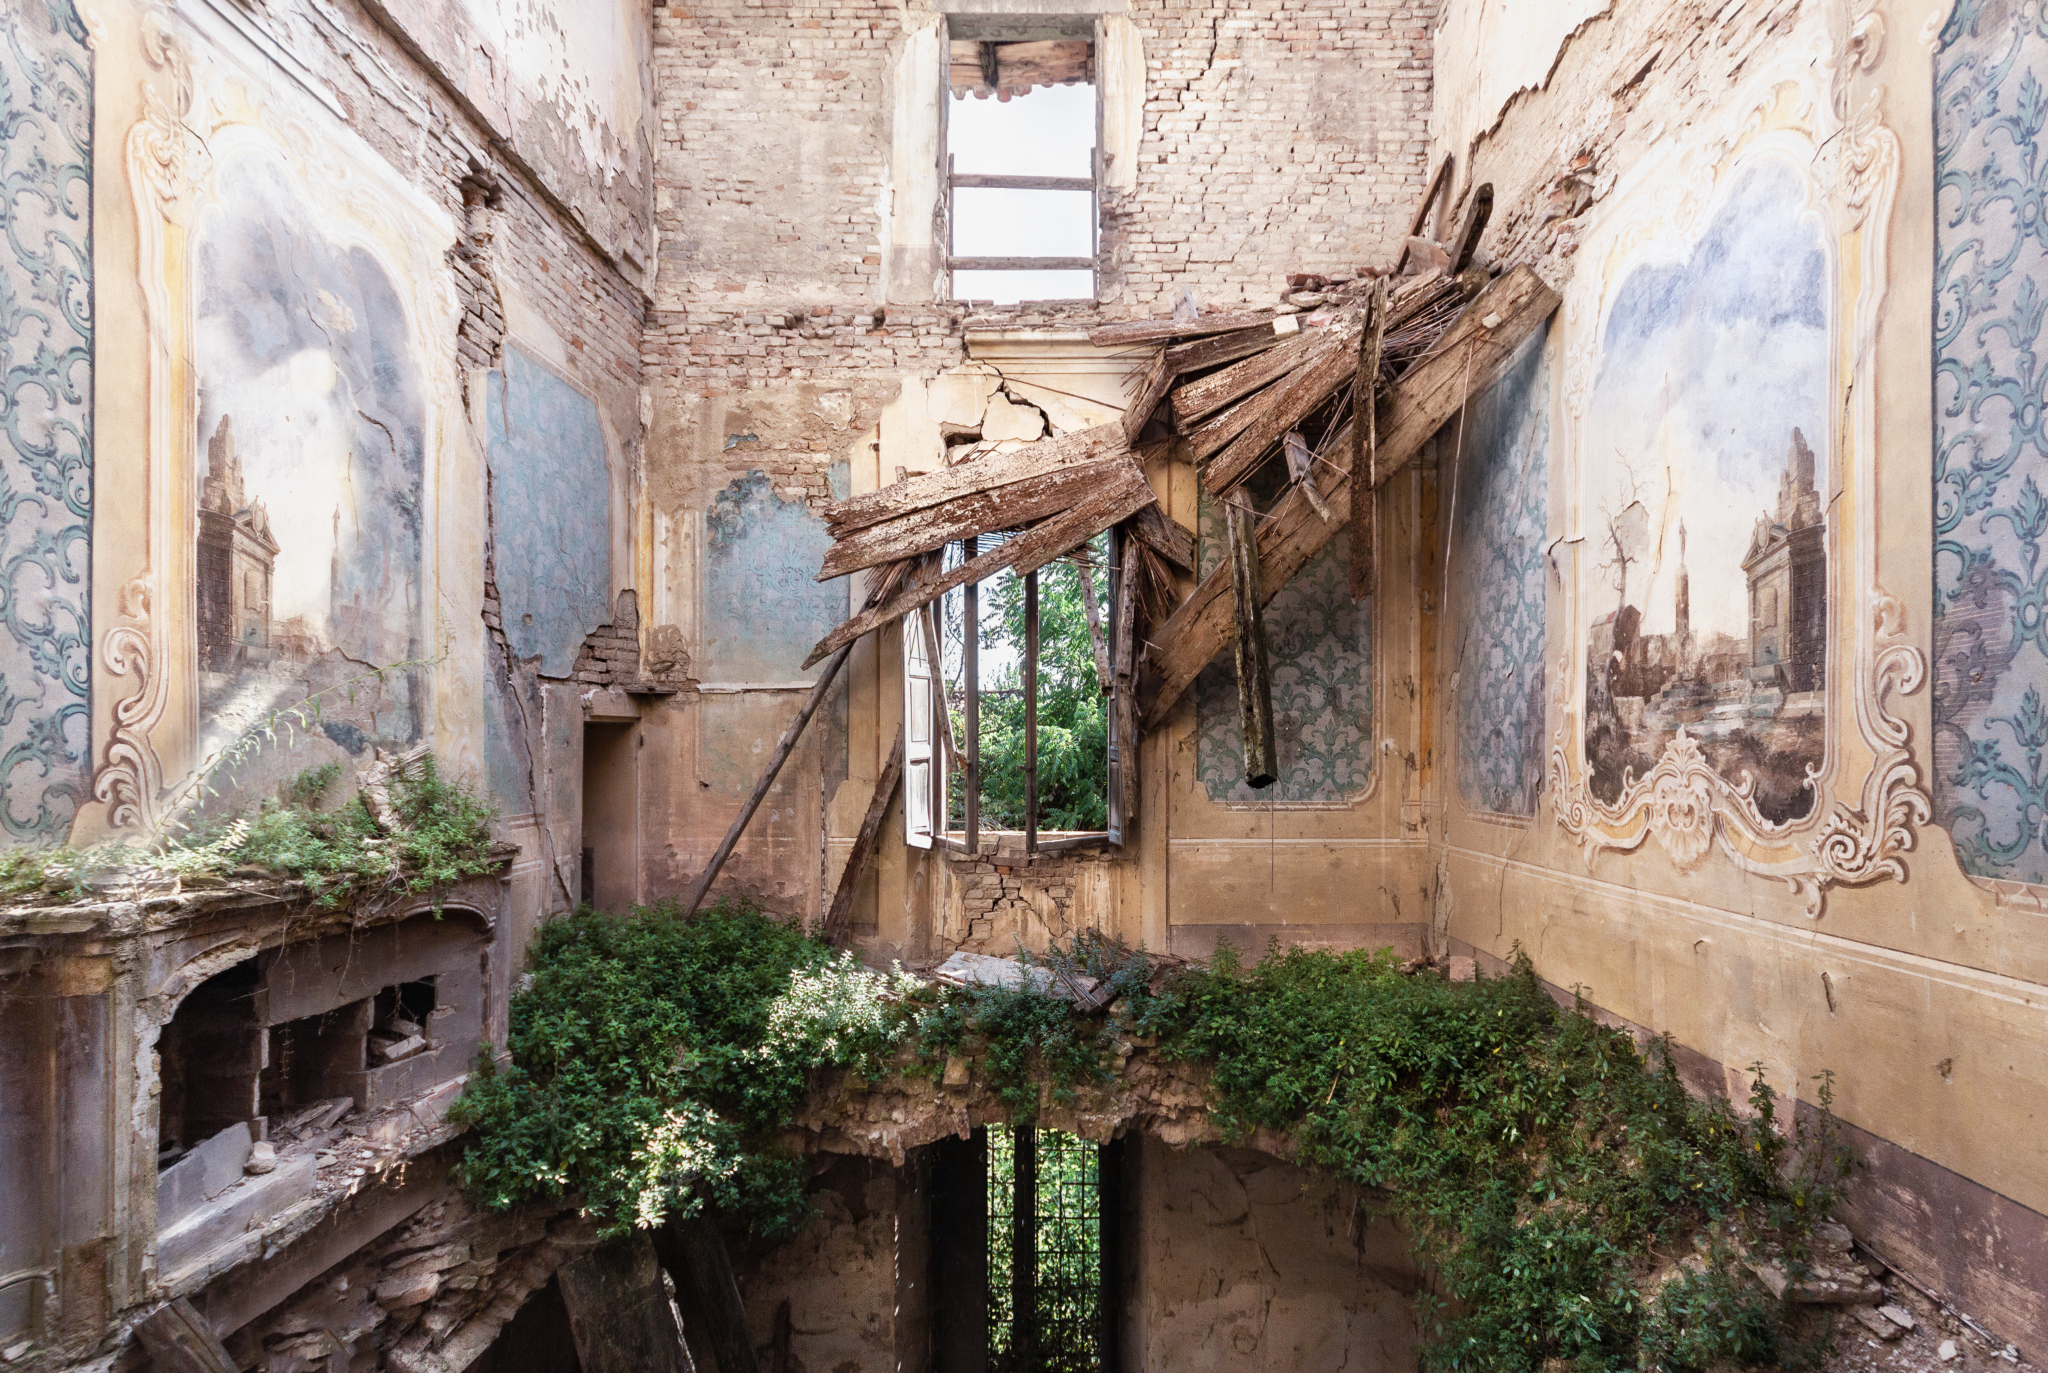 Mirror of Fate - Abandoned villa in ruins with stunning frescoes, Italy